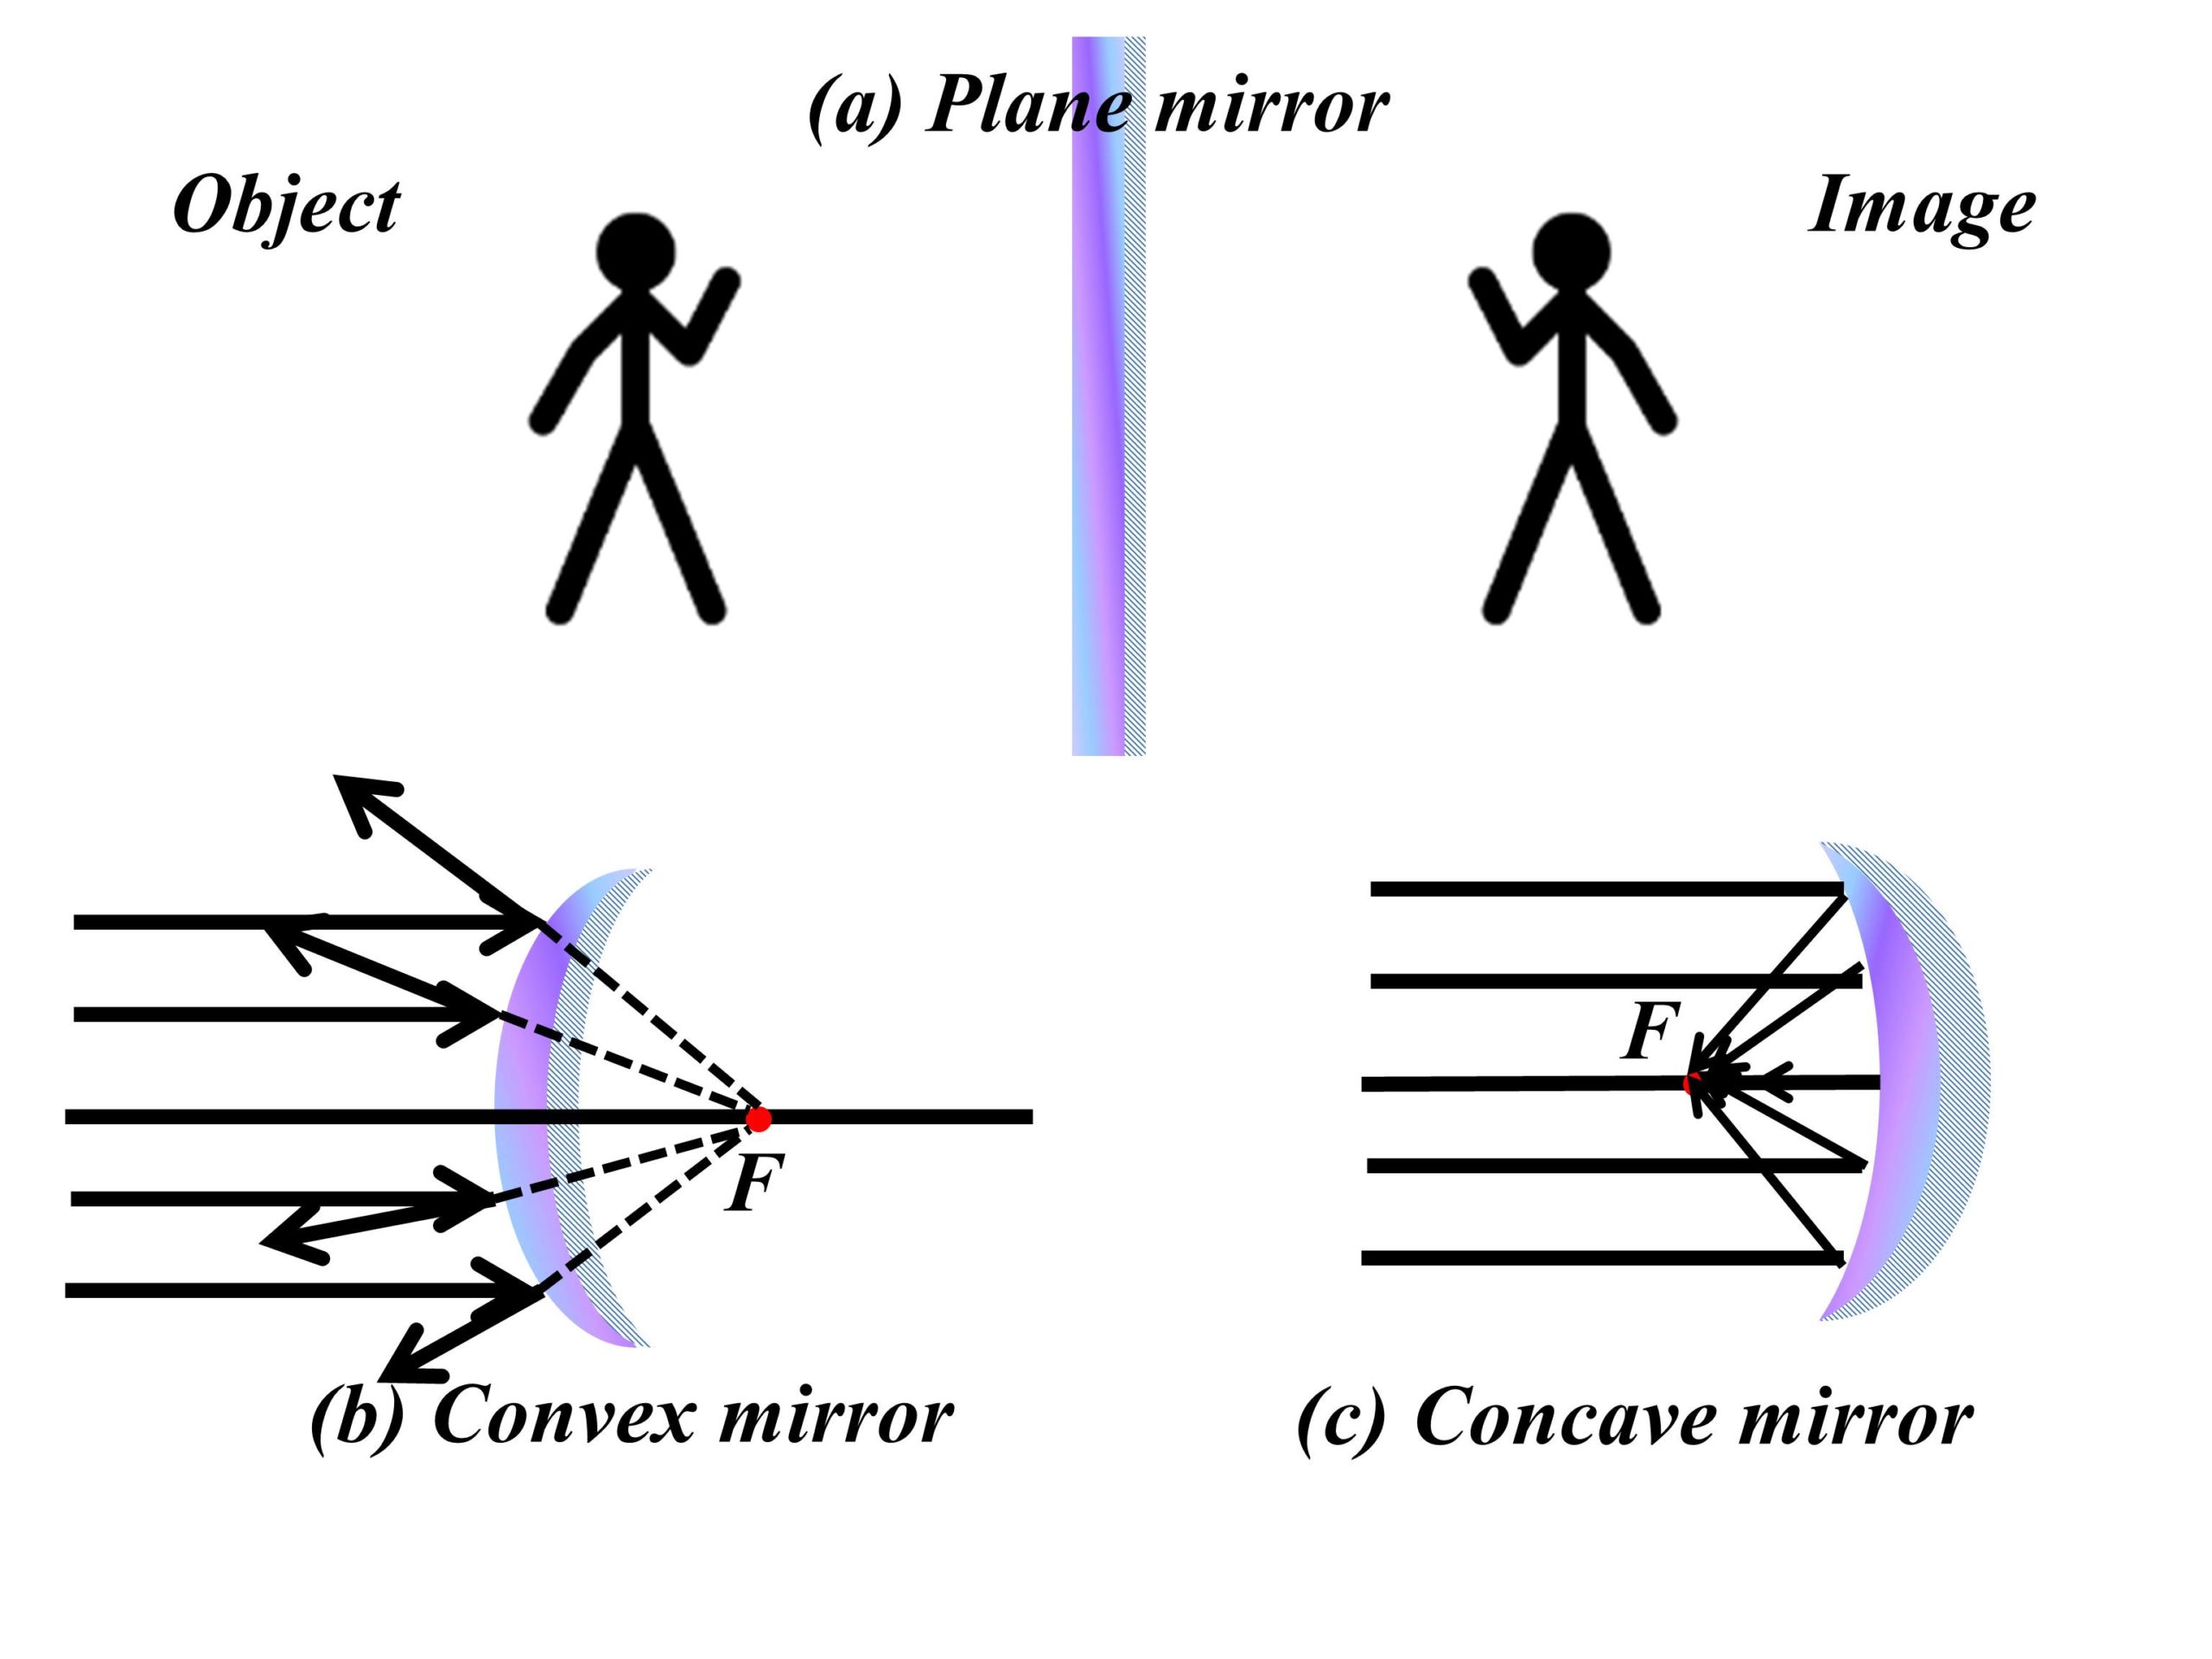 Types of mirrors (plane, convex and concave mirrors)